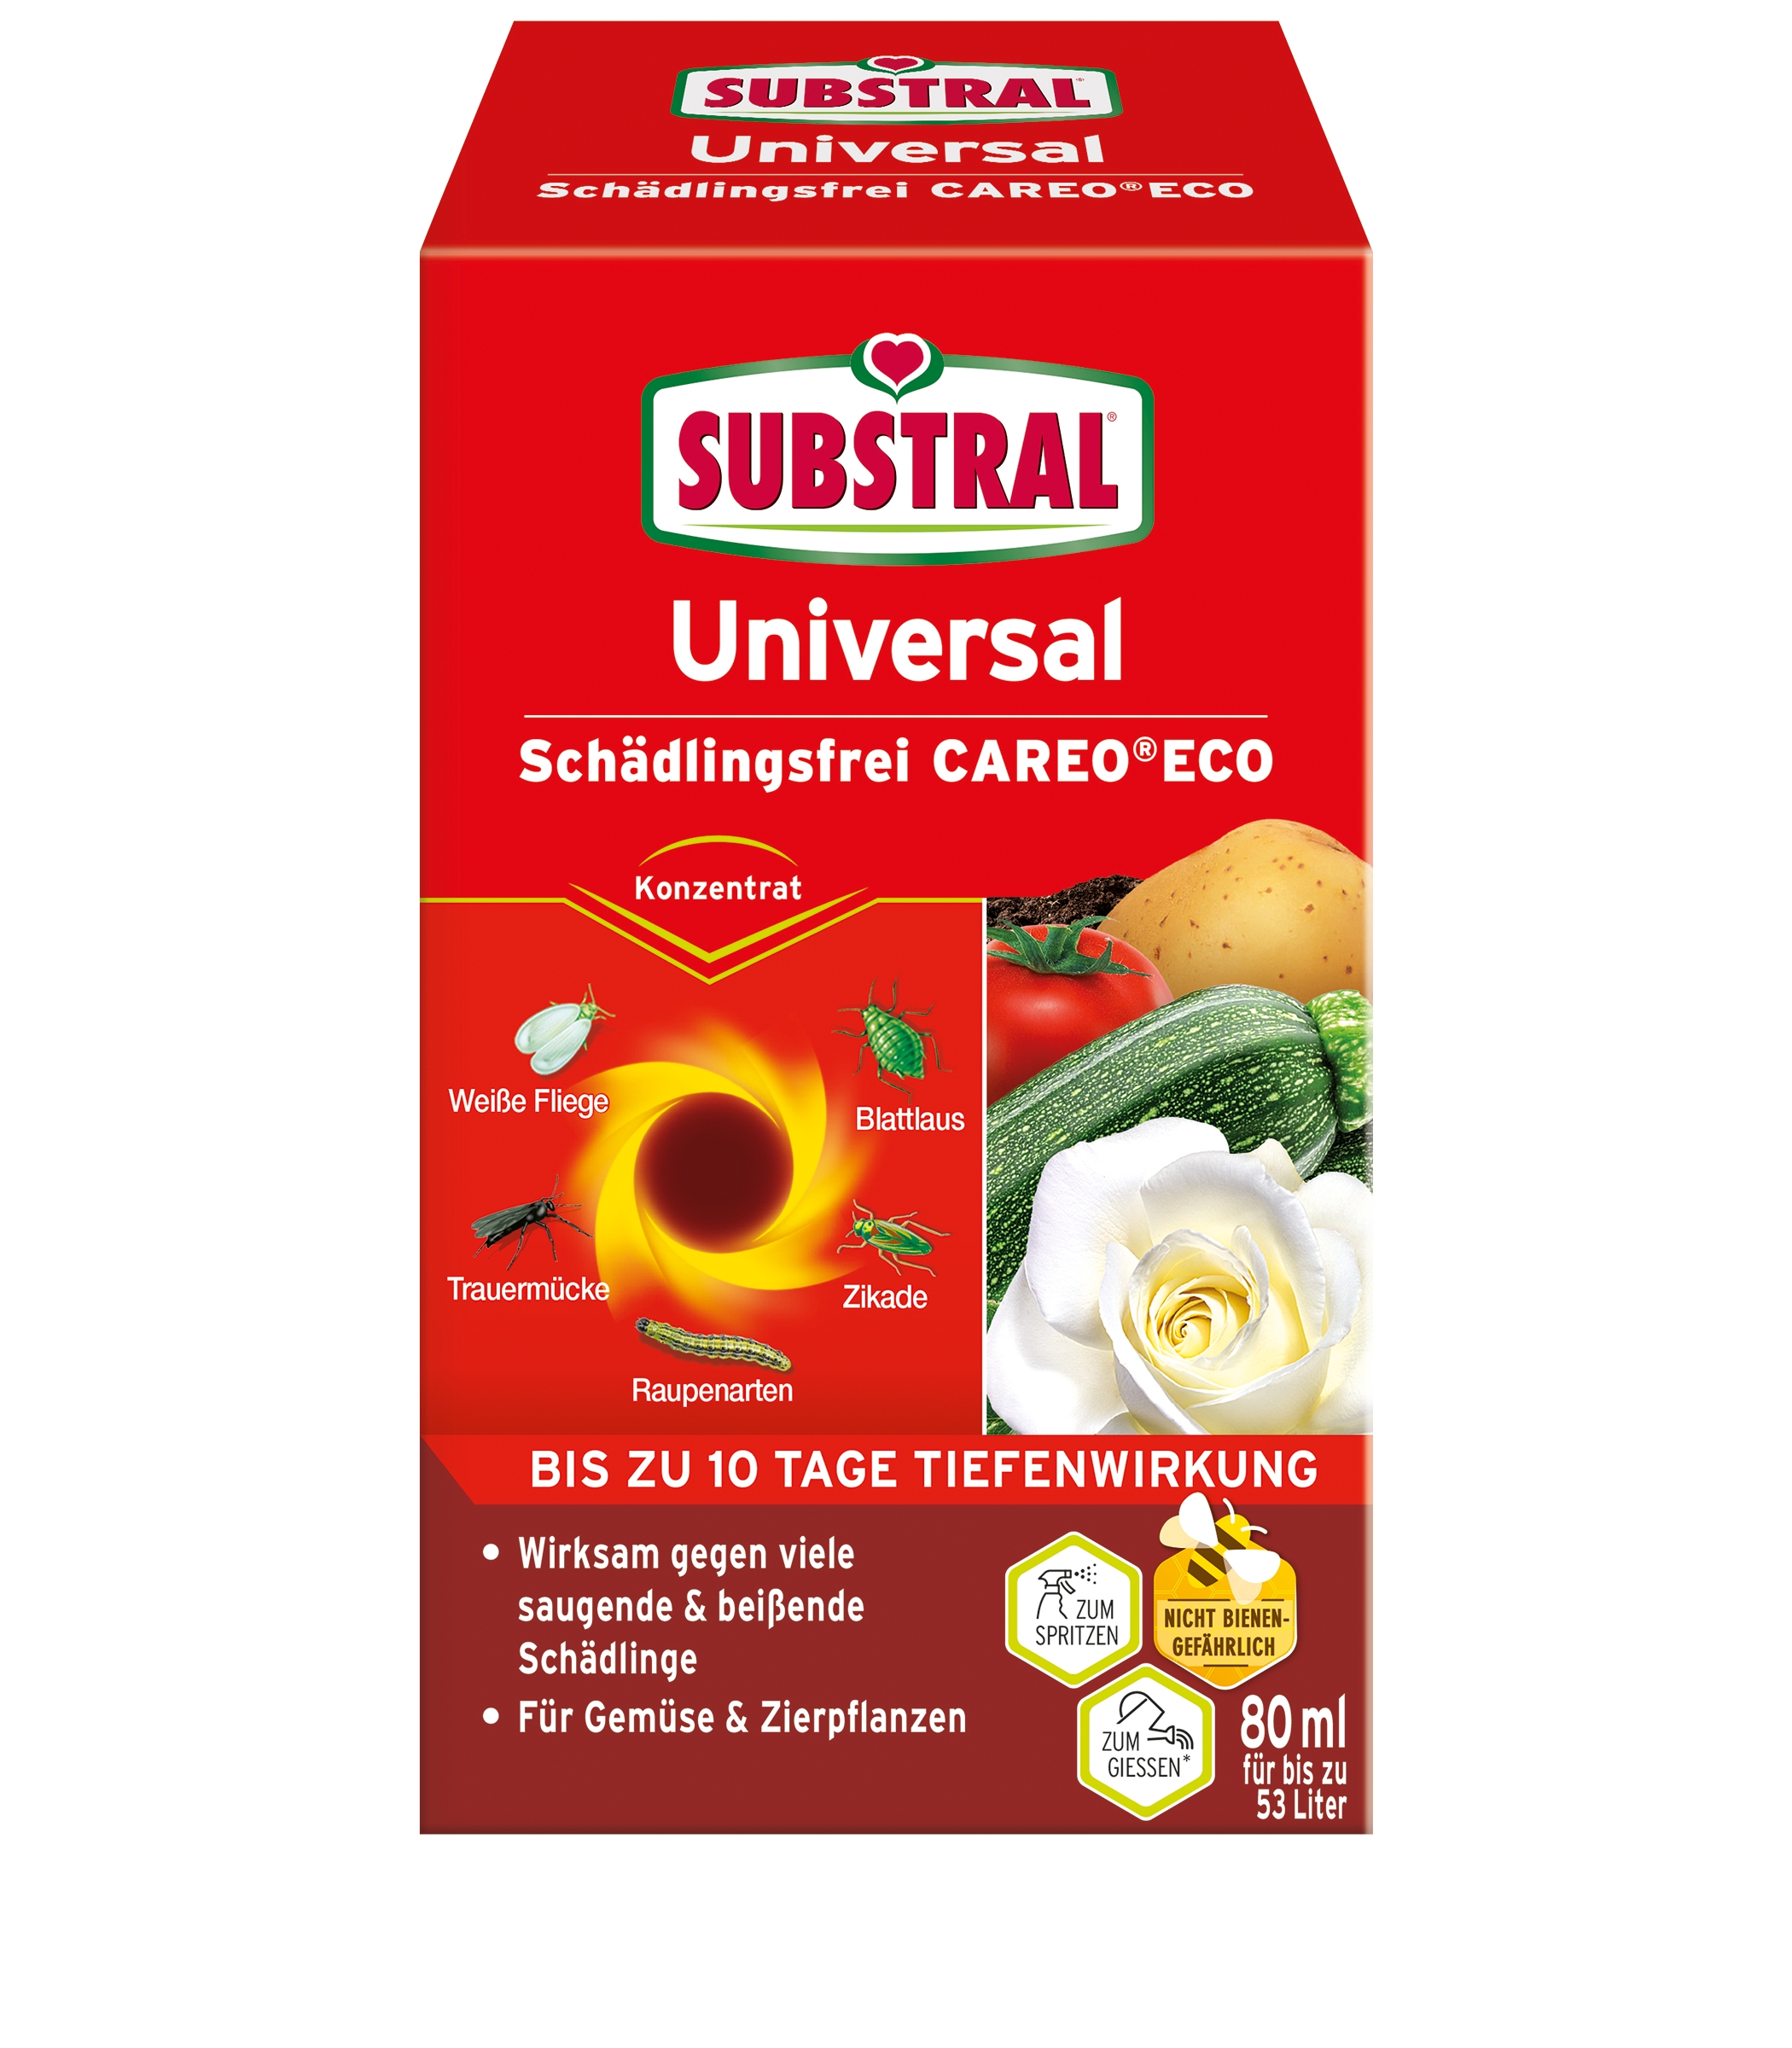 Substral Universal Schädlingsfrei Careo Eco - 80 ml